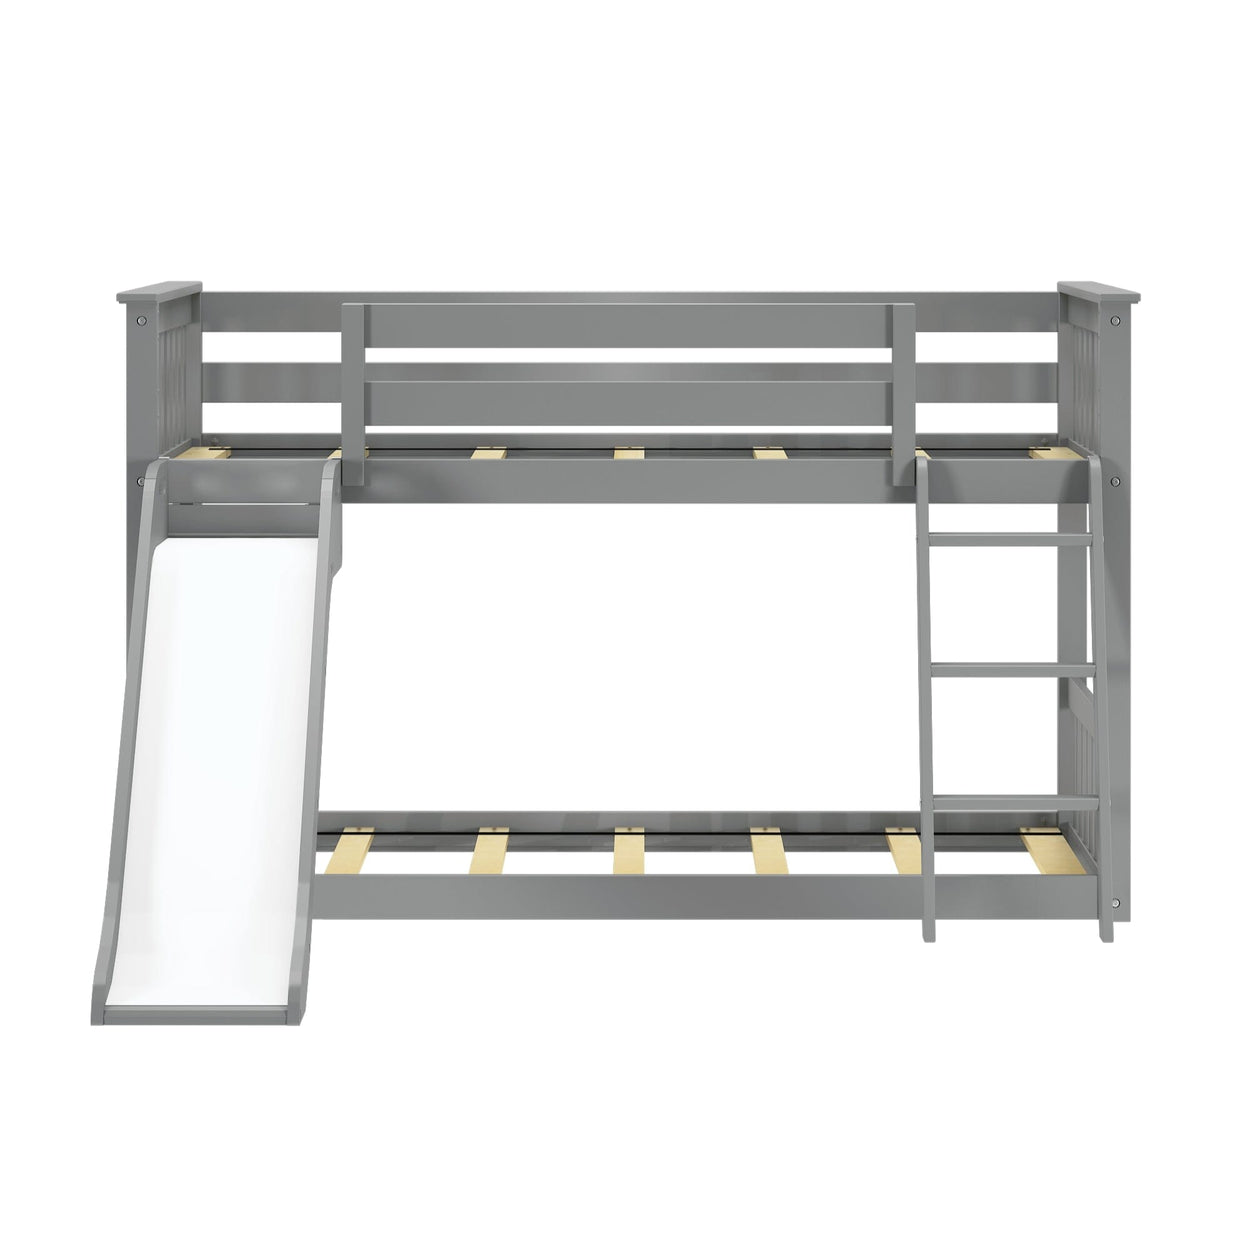 180417121069 : Bunk Beds Low Bunk with Easy Slide and Black and White Farmhouse Curtain, Grey